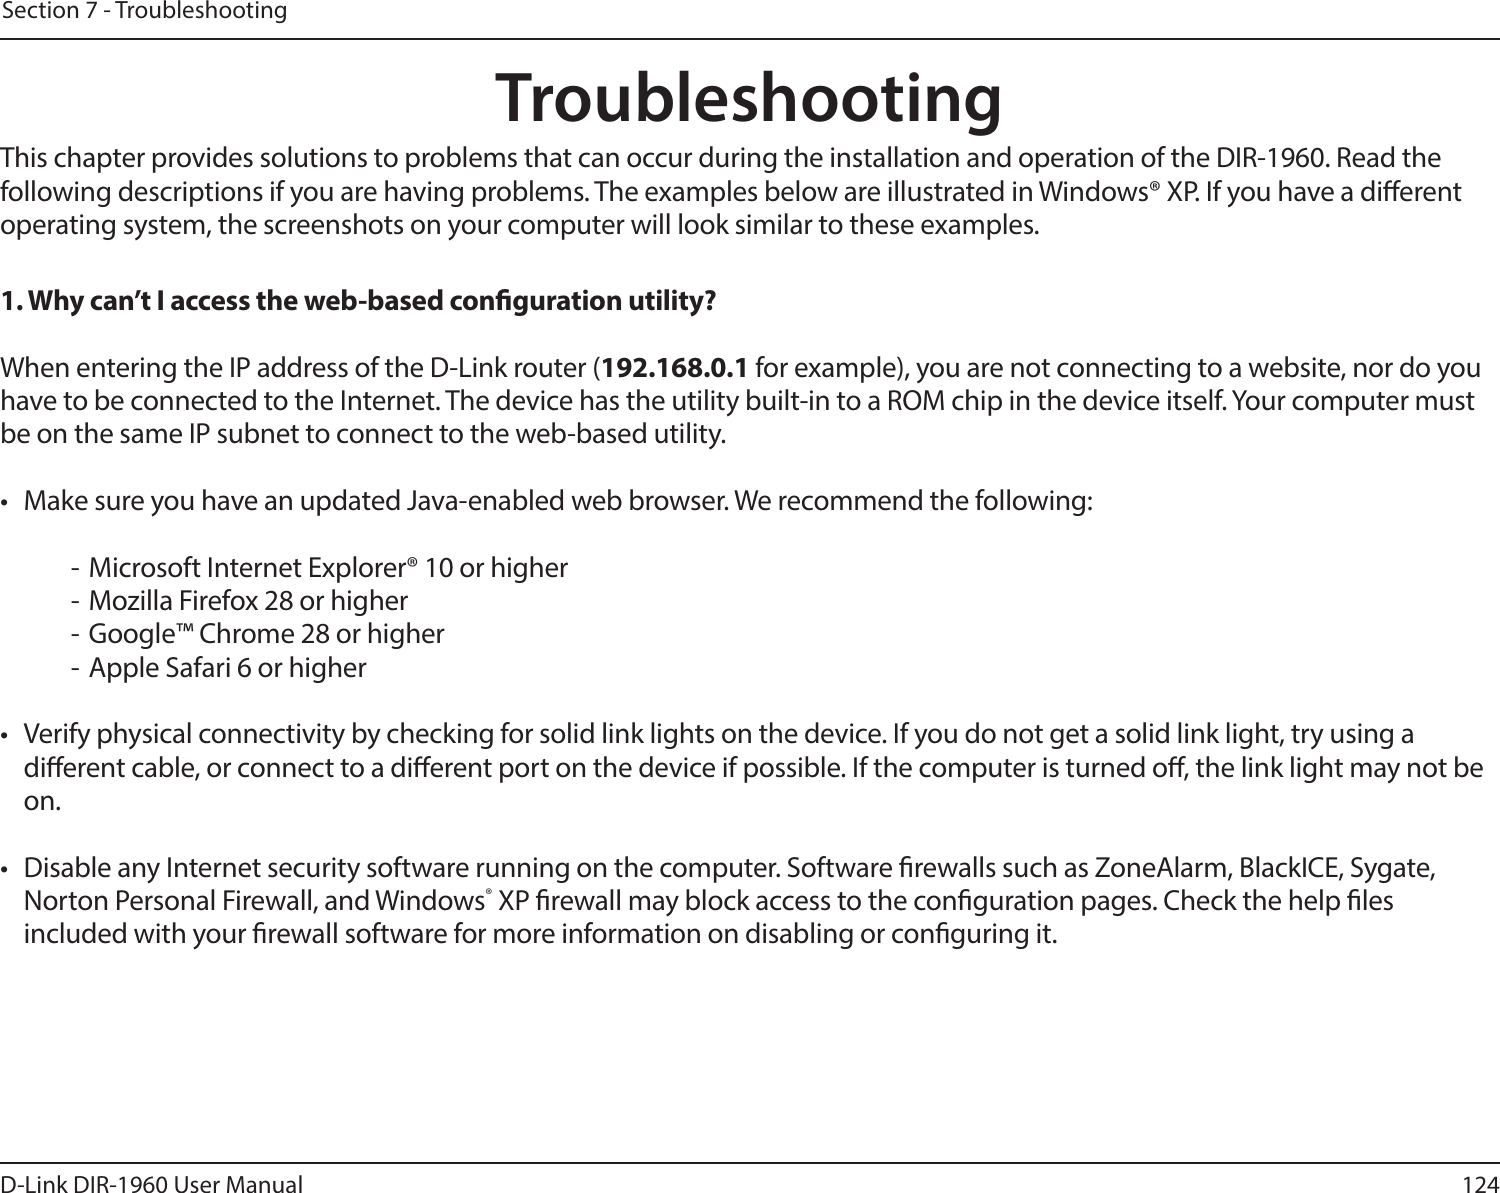 124D-Link DIR-1960 User ManualSection 7 - TroubleshootingTroubleshootingThis chapter provides solutions to problems that can occur during the installation and operation of the DIR-1960. Read the following descriptions if you are having problems. The examples below are illustrated in Windows® XP. If you have a dierent operating system, the screenshots on your computer will look similar to these examples.1. Why can’t I access the web-based conguration utility?When entering the IP address of the D-Link router (192.168.0.1 for example), you are not connecting to a website, nor do you have to be connected to the Internet. The device has the utility built-in to a ROM chip in the device itself. Your computer must be on the same IP subnet to connect to the web-based utility. •  Make sure you have an updated Java-enabled web browser. We recommend the following:  - Microsoft Internet Explorer® 10 or higher- Mozilla Firefox 28 or higher- Google™ Chrome 28 or higher- Apple Safari 6 or higher•  Verify physical connectivity by checking for solid link lights on the device. If you do not get a solid link light, try using a dierent cable, or connect to a dierent port on the device if possible. If the computer is turned o, the link light may not be on.•  Disable any Internet security software running on the computer. Software rewalls such as ZoneAlarm, BlackICE, Sygate, Norton Personal Firewall, and Windows® XP rewall may block access to the conguration pages. Check the help les included with your rewall software for more information on disabling or conguring it.